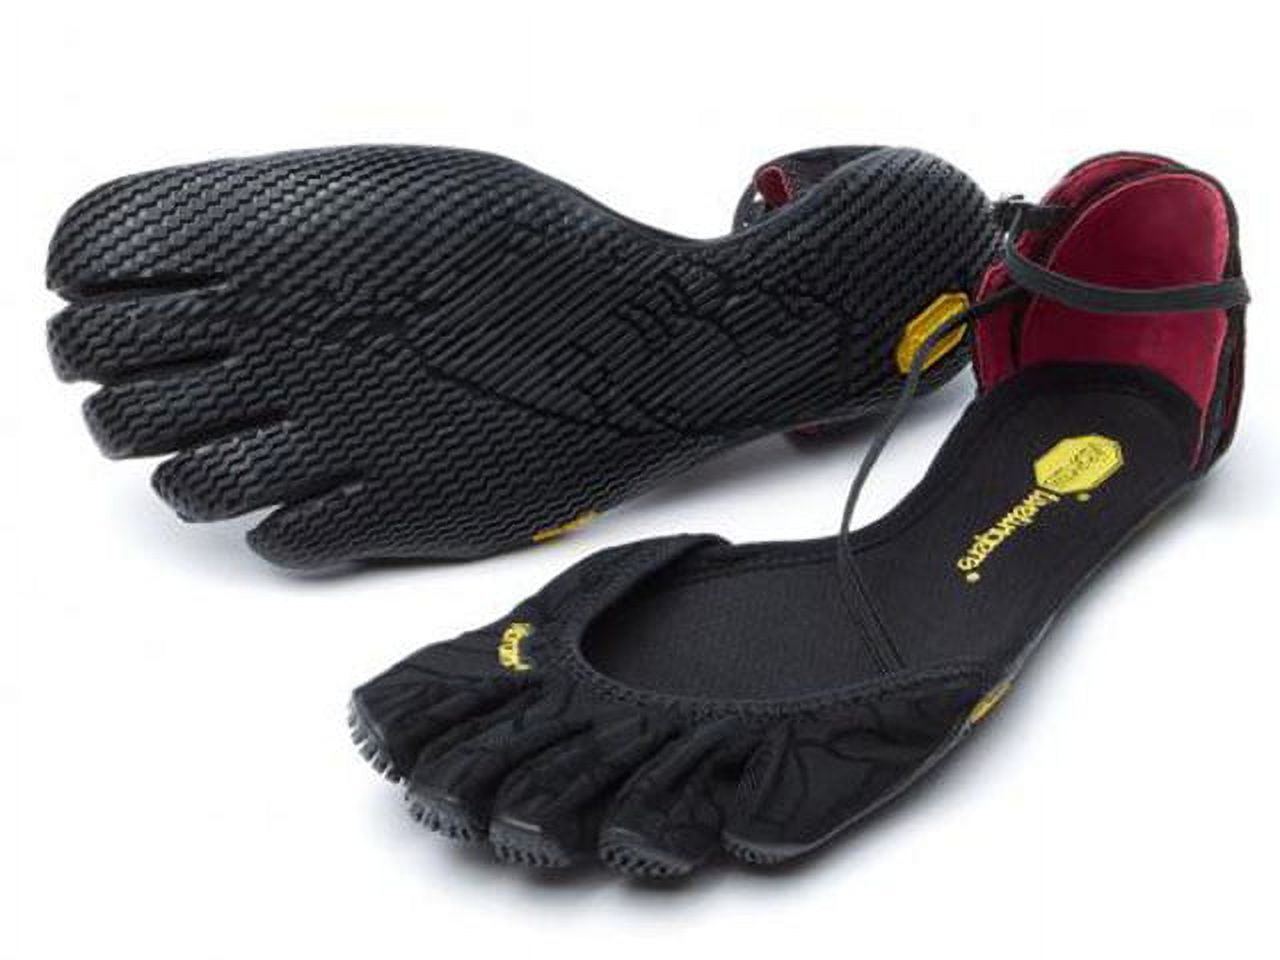 While Vibram's VI-B shoes aren't explicitly designed for yoga practice, a  small cult of fitness bloggers and influence…